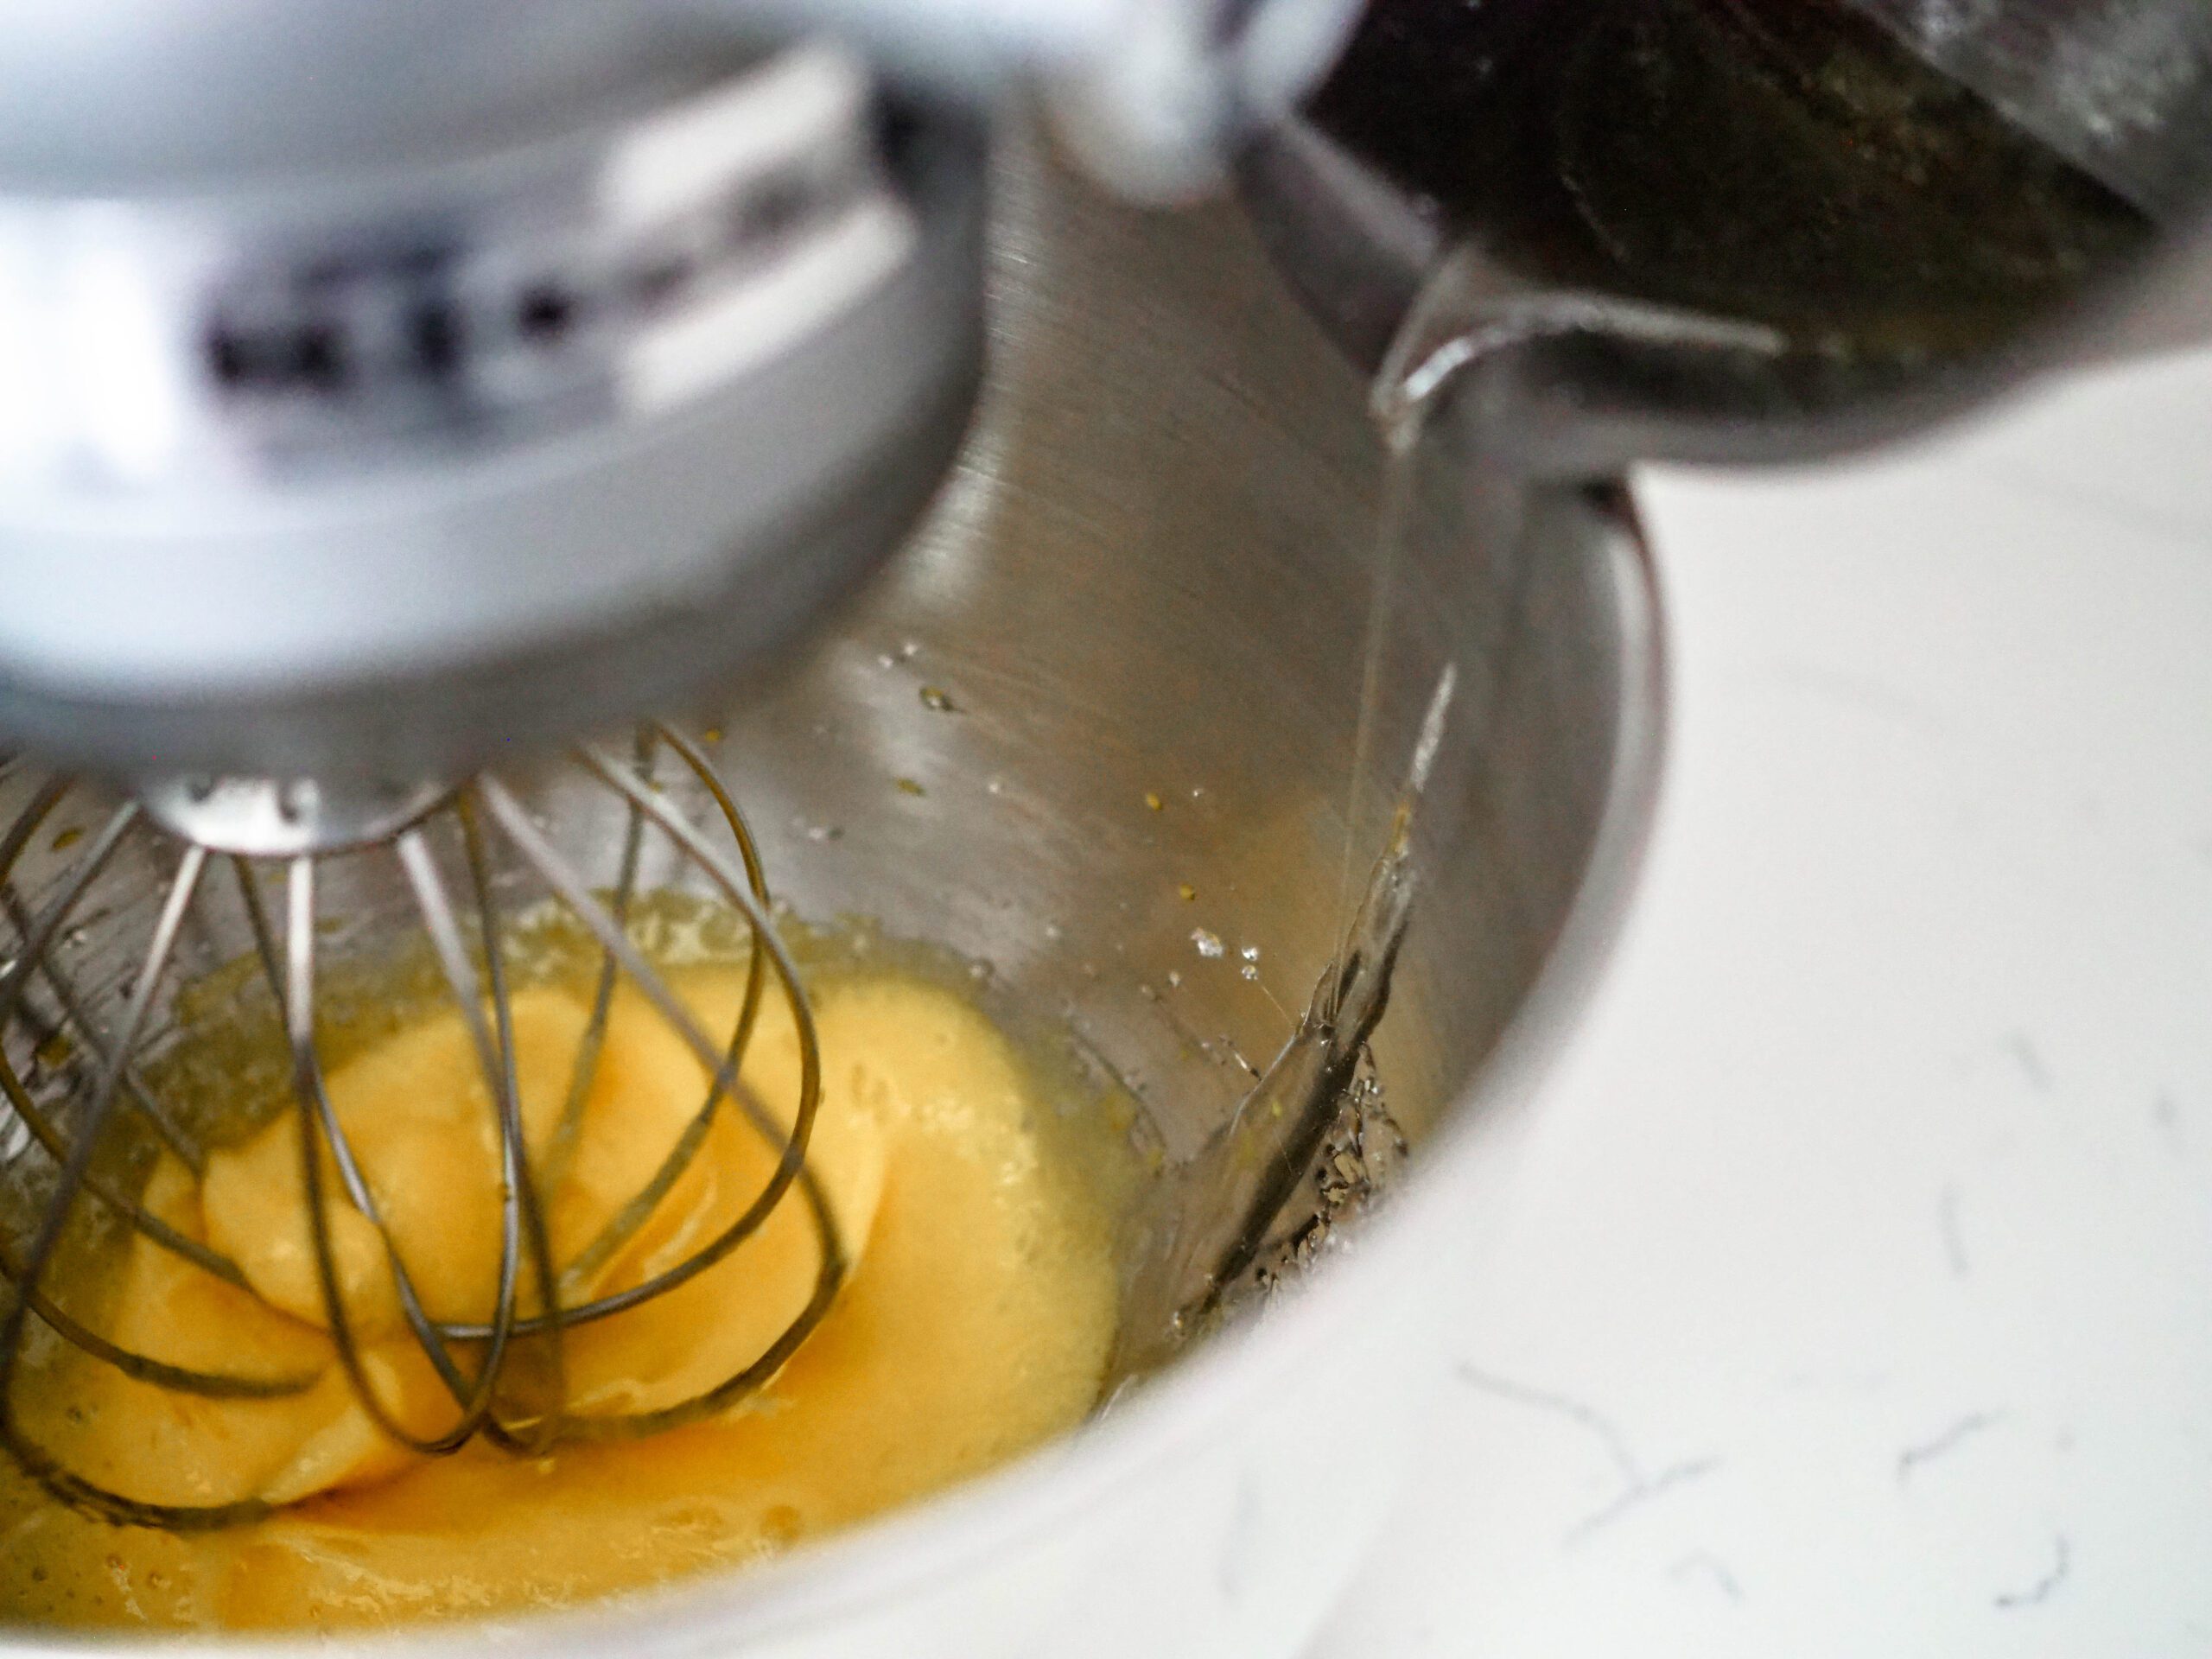 Sugar syrup is poured on the side of the stand mixer bowl instead of directly onto the whisk.